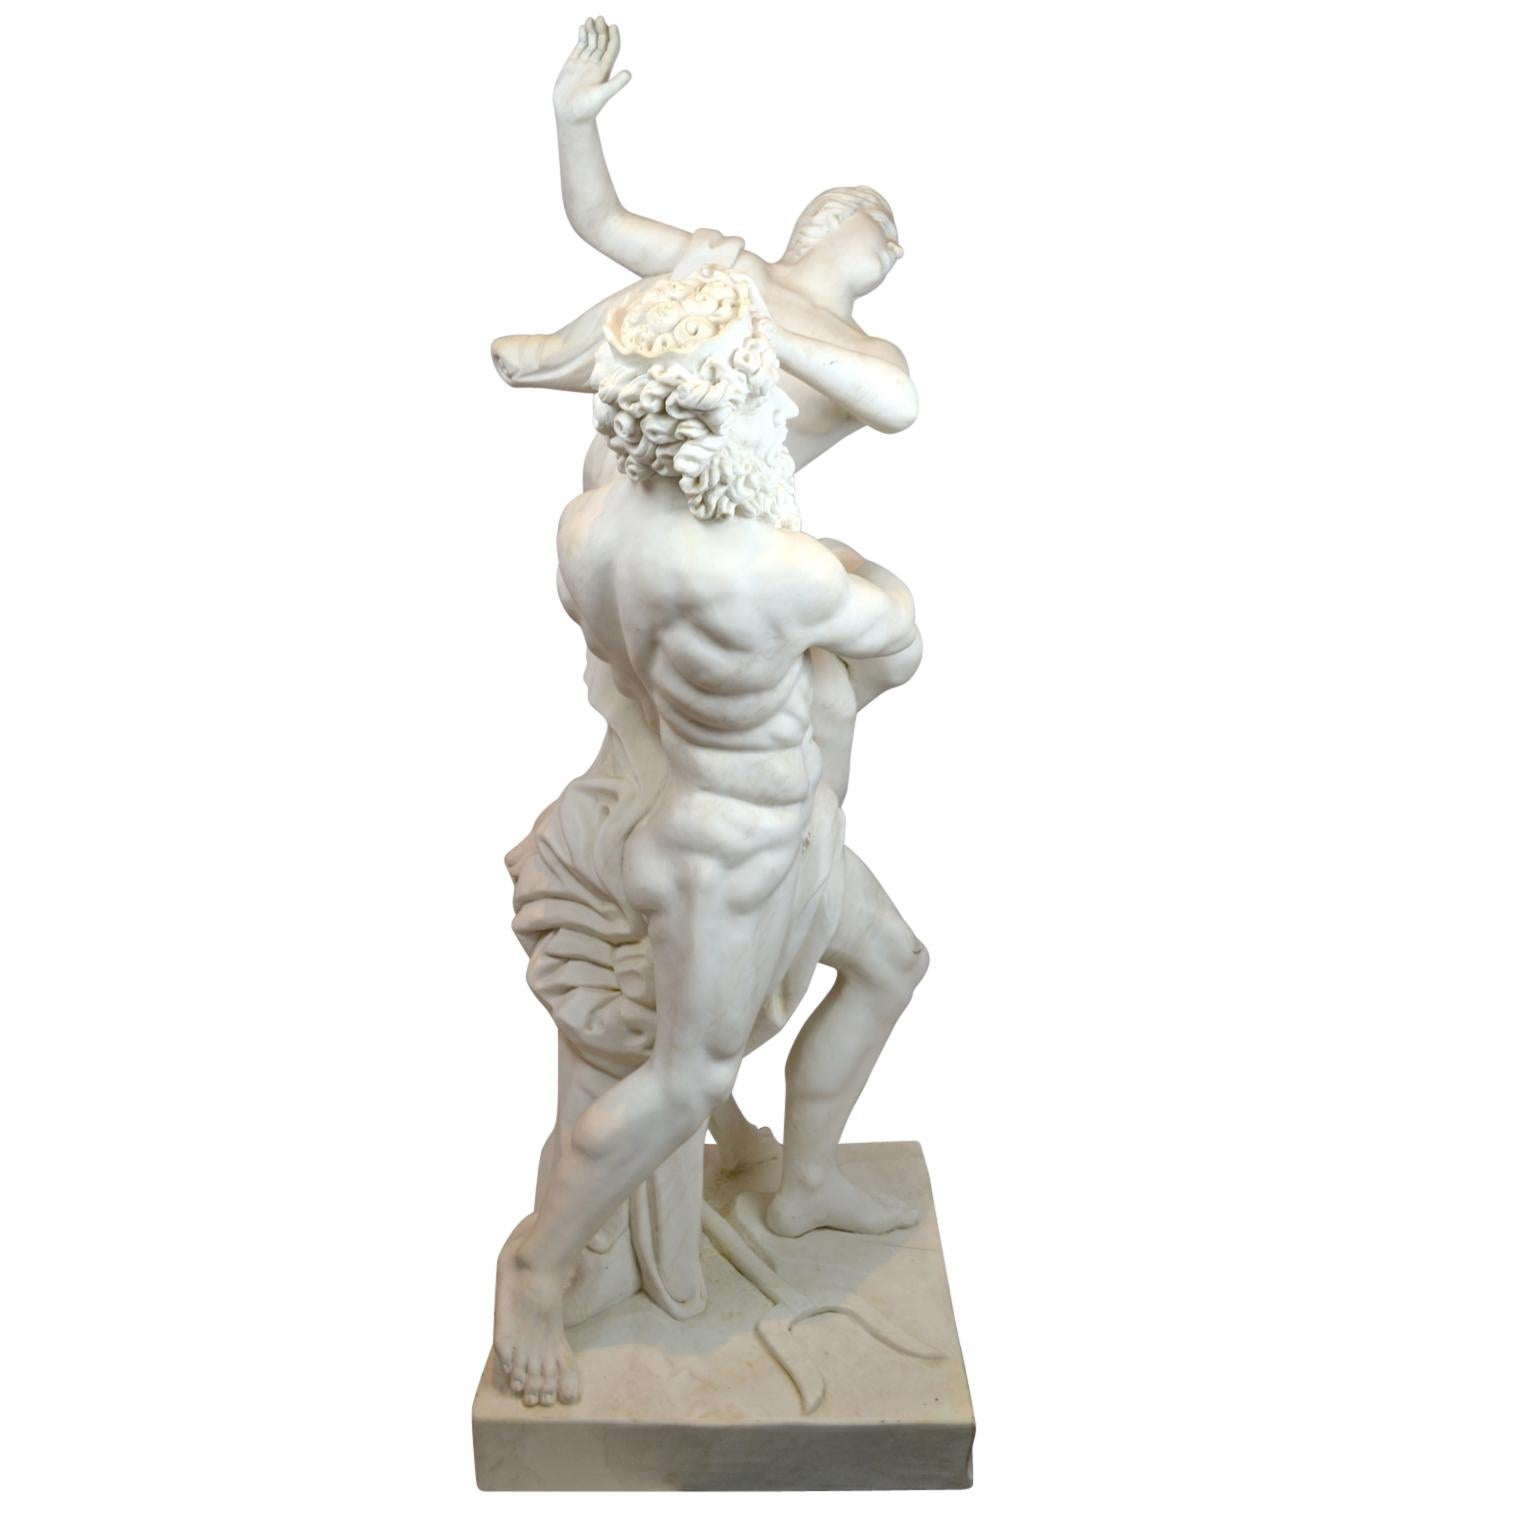 The rape of Prosperina by Francesco Fabi Altini, (1830-1906) after the 17th century original by Gian Lorenzo Bernini now in the Palazzo Borghese in Rome. Signed F. Fabi Altini Rome 1870 on the base. The statue sits on a pianted wooden plinth.

The